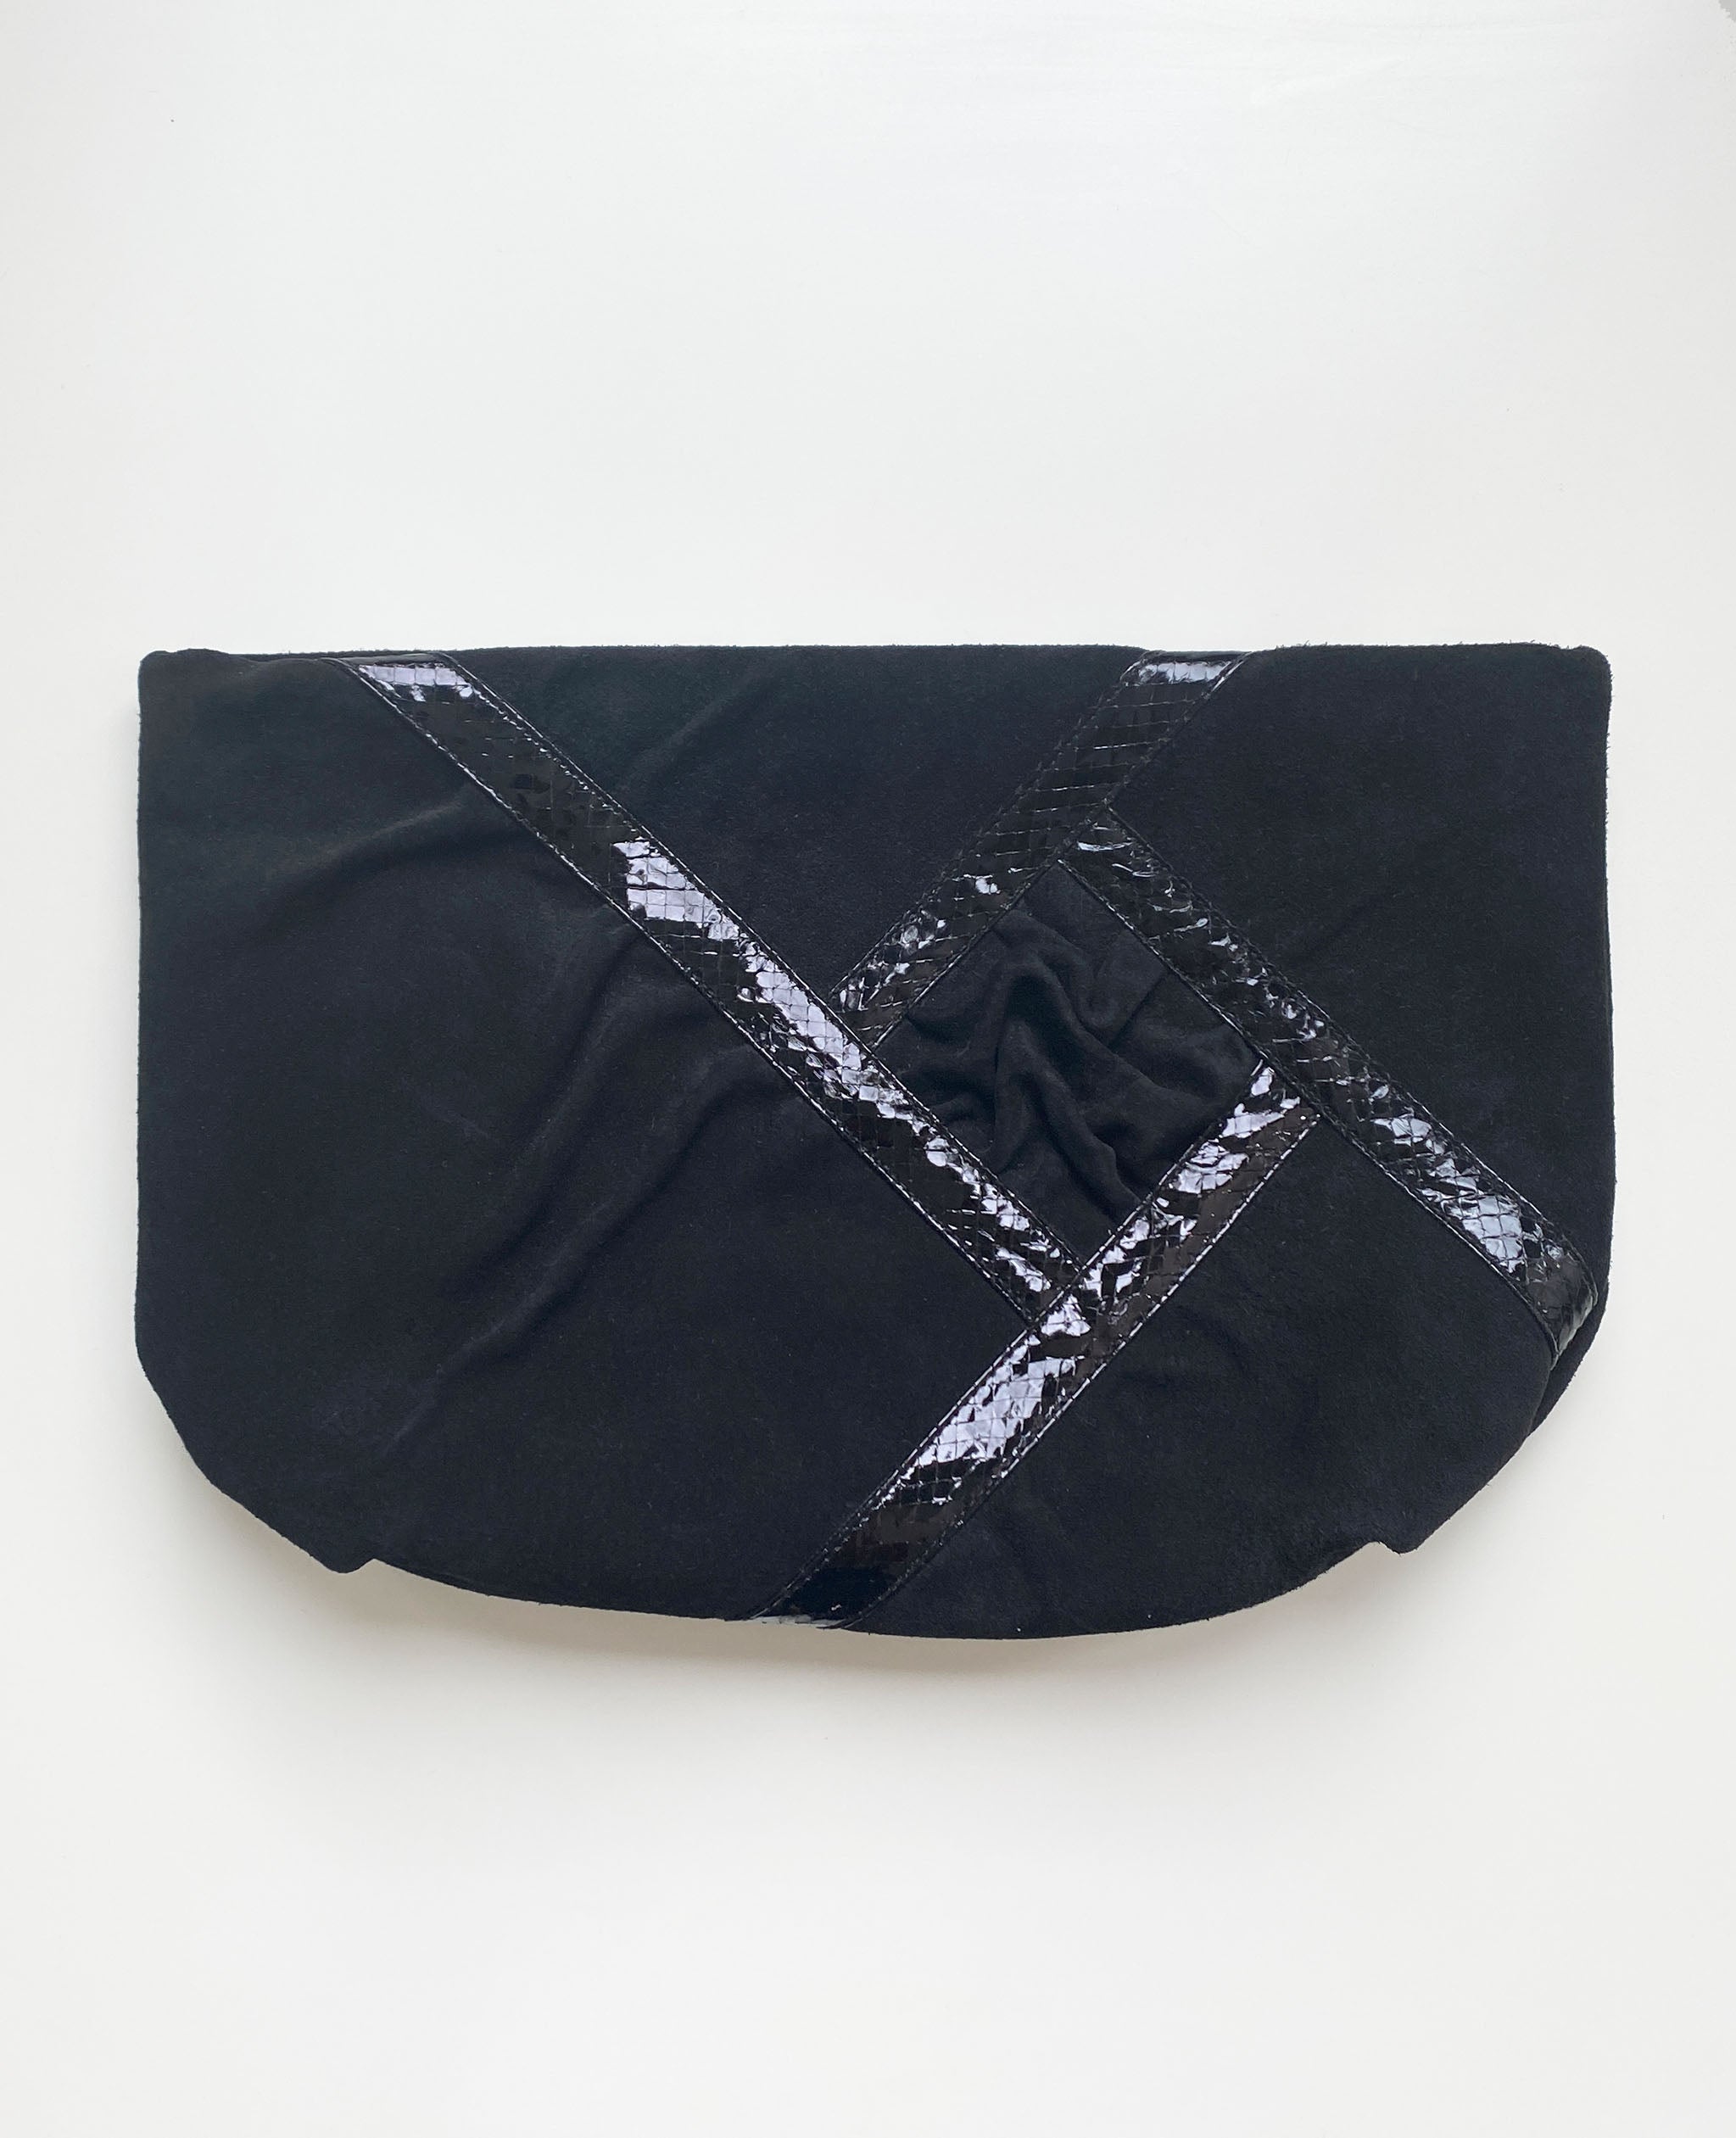 Black Suede Clutch with Strap